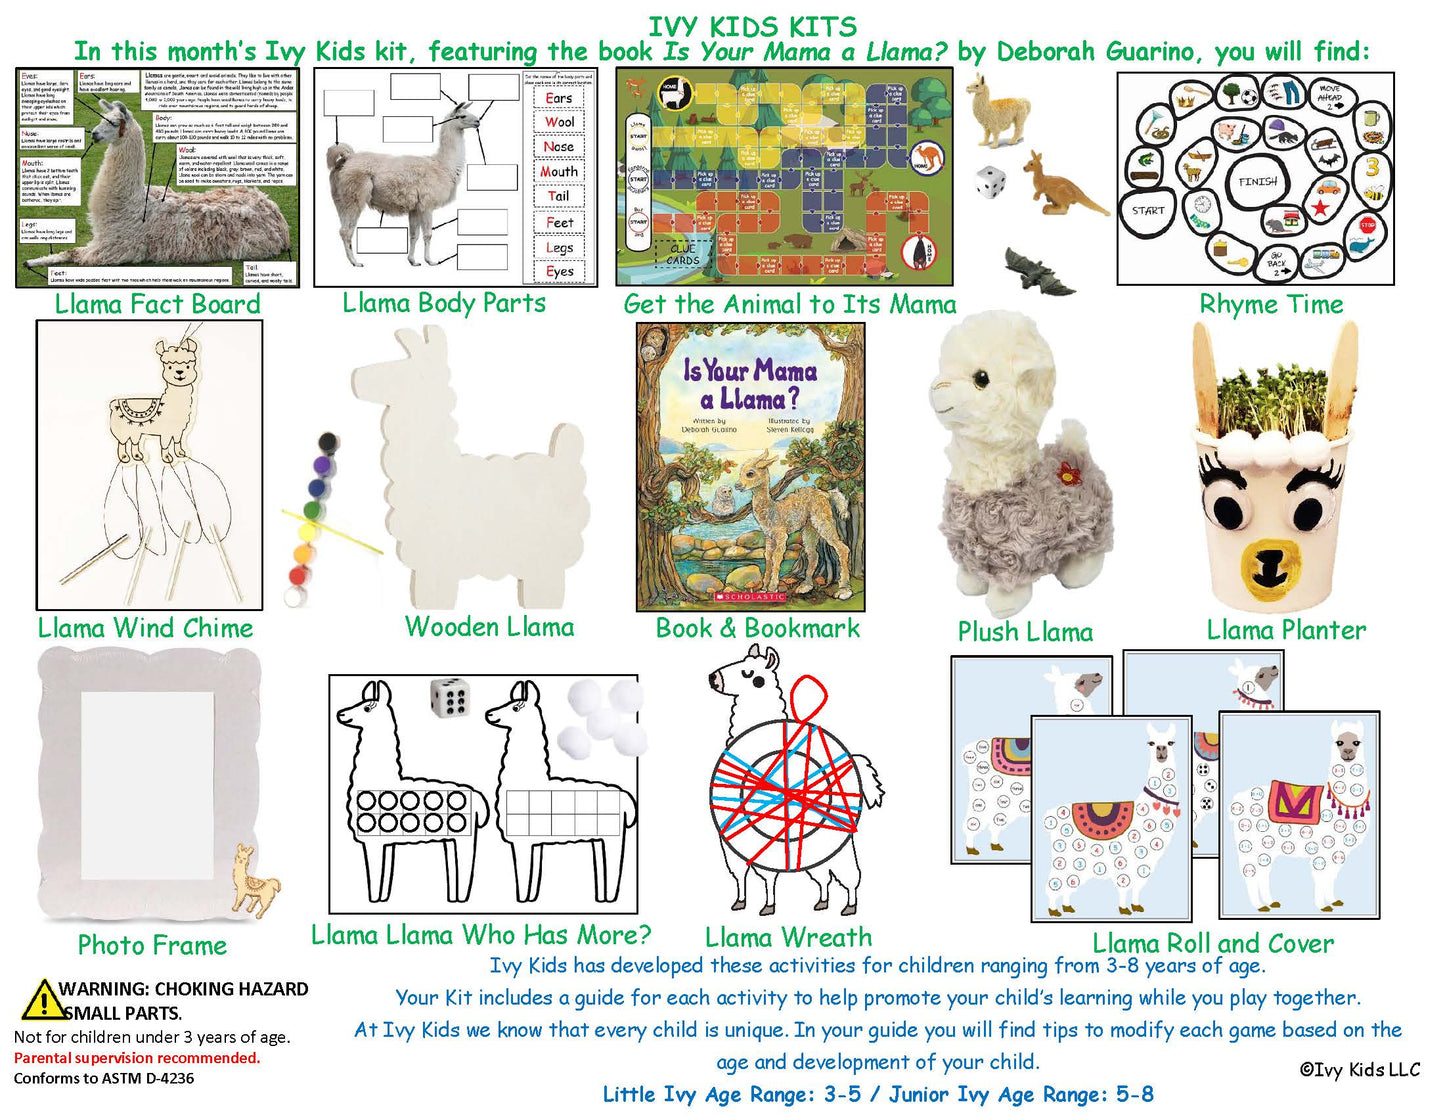 Llama themed activities for kids based on Is Your Mama a Llama?